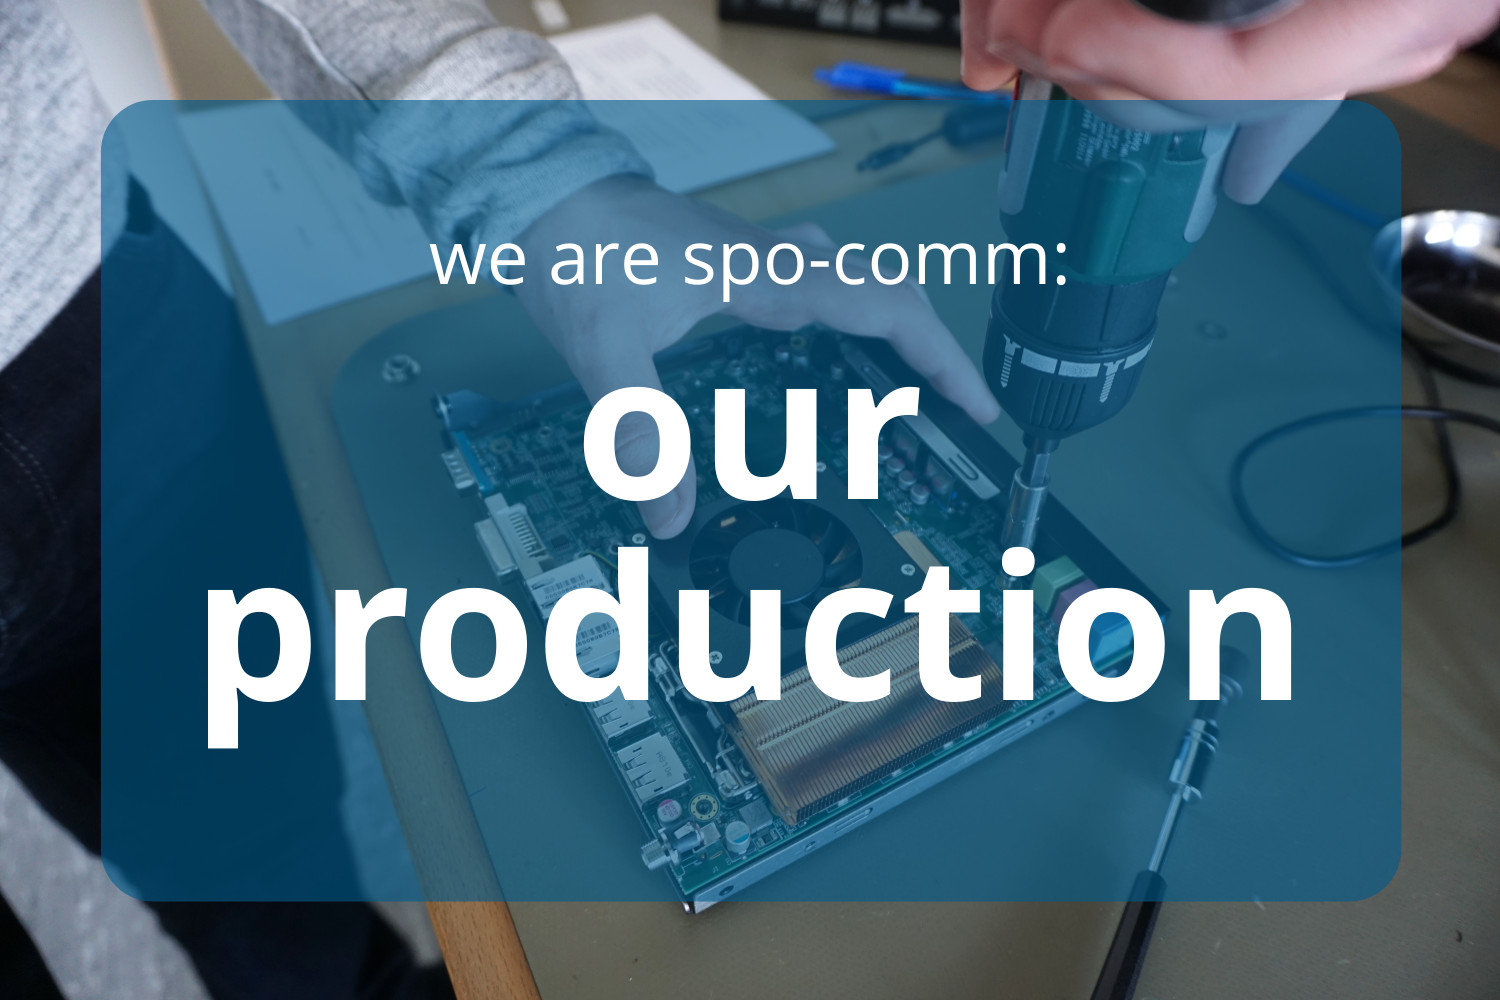 Screws, barcodes and package tape: The spo-comm production